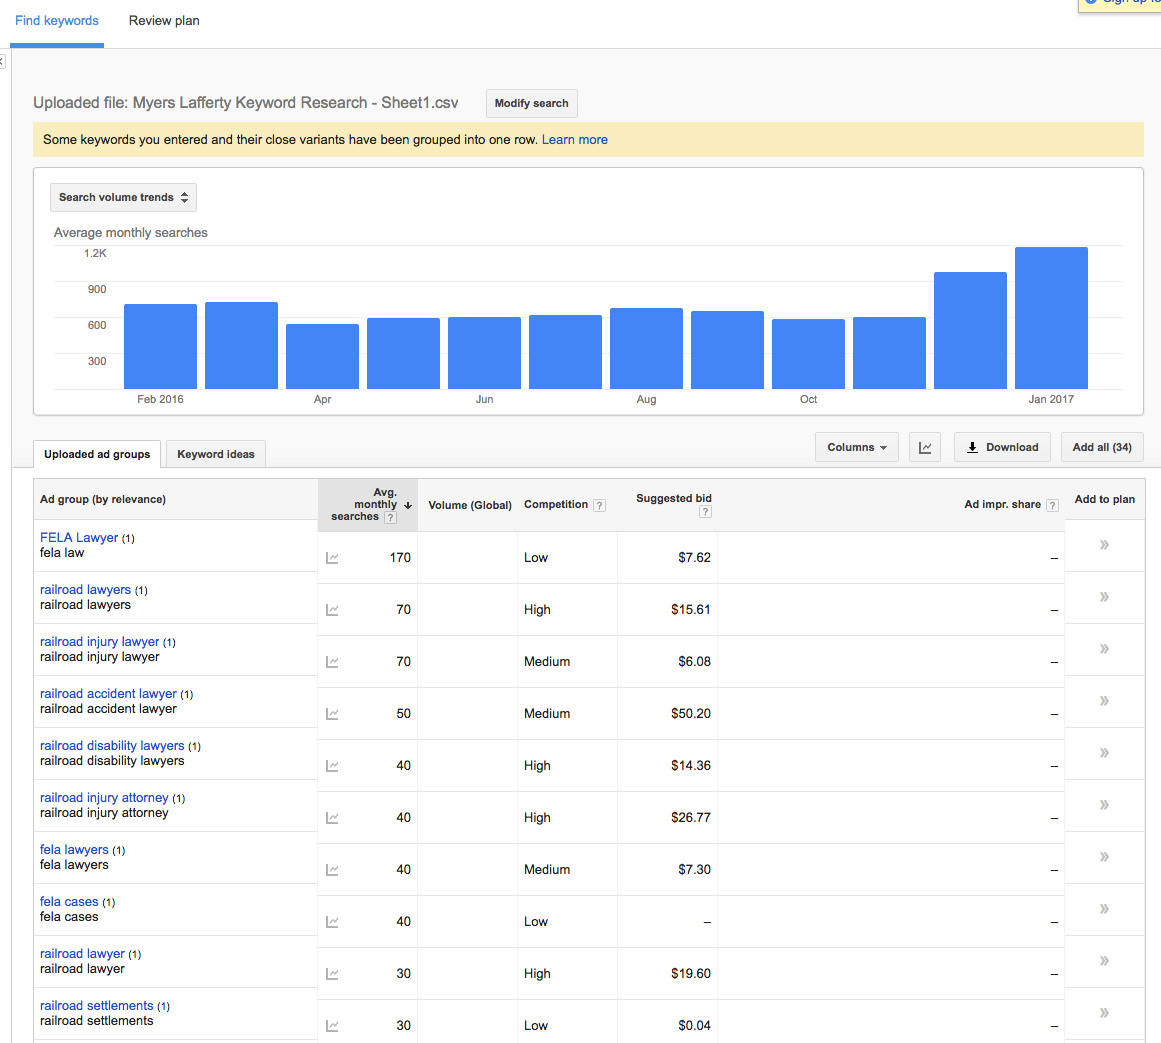 The final list from Google Keyword Planner